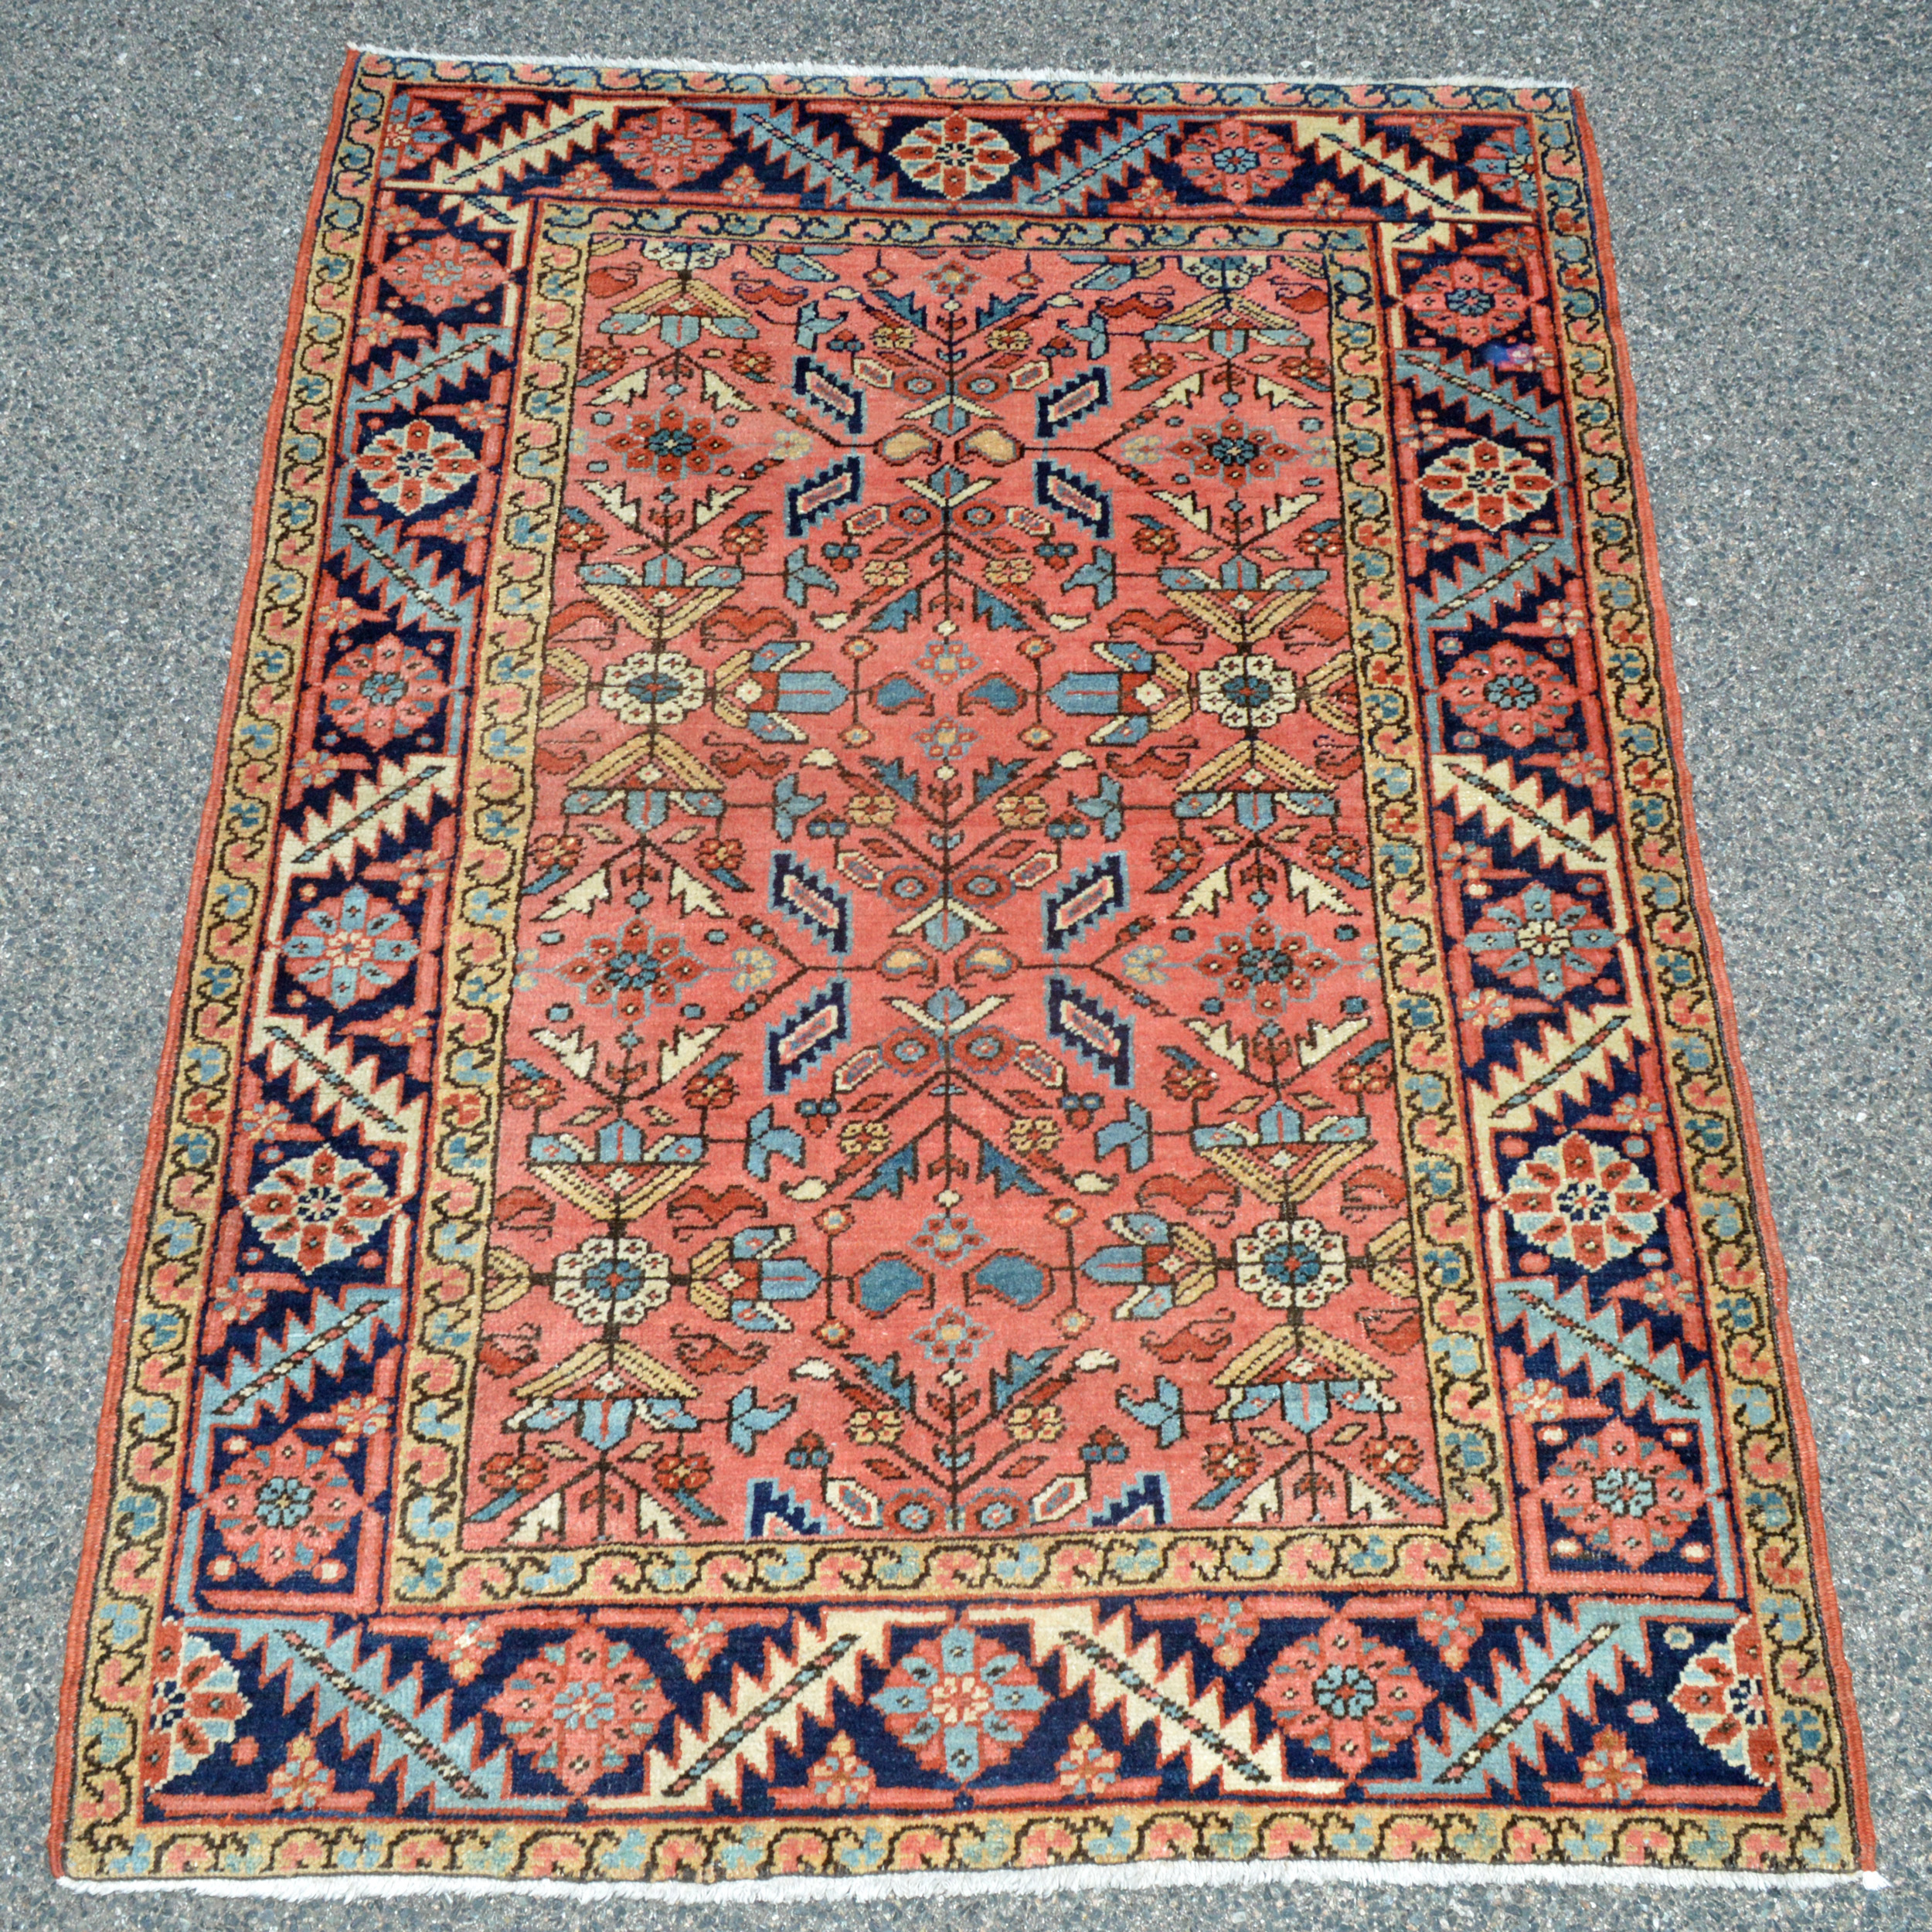 Antique Persian Heriz rug with an uncommon coral color field decorated with stylized leaves and flowers and framed by a navy blue border - Douglas Stock Gallery, antique Oriental rugs Boston,MA area